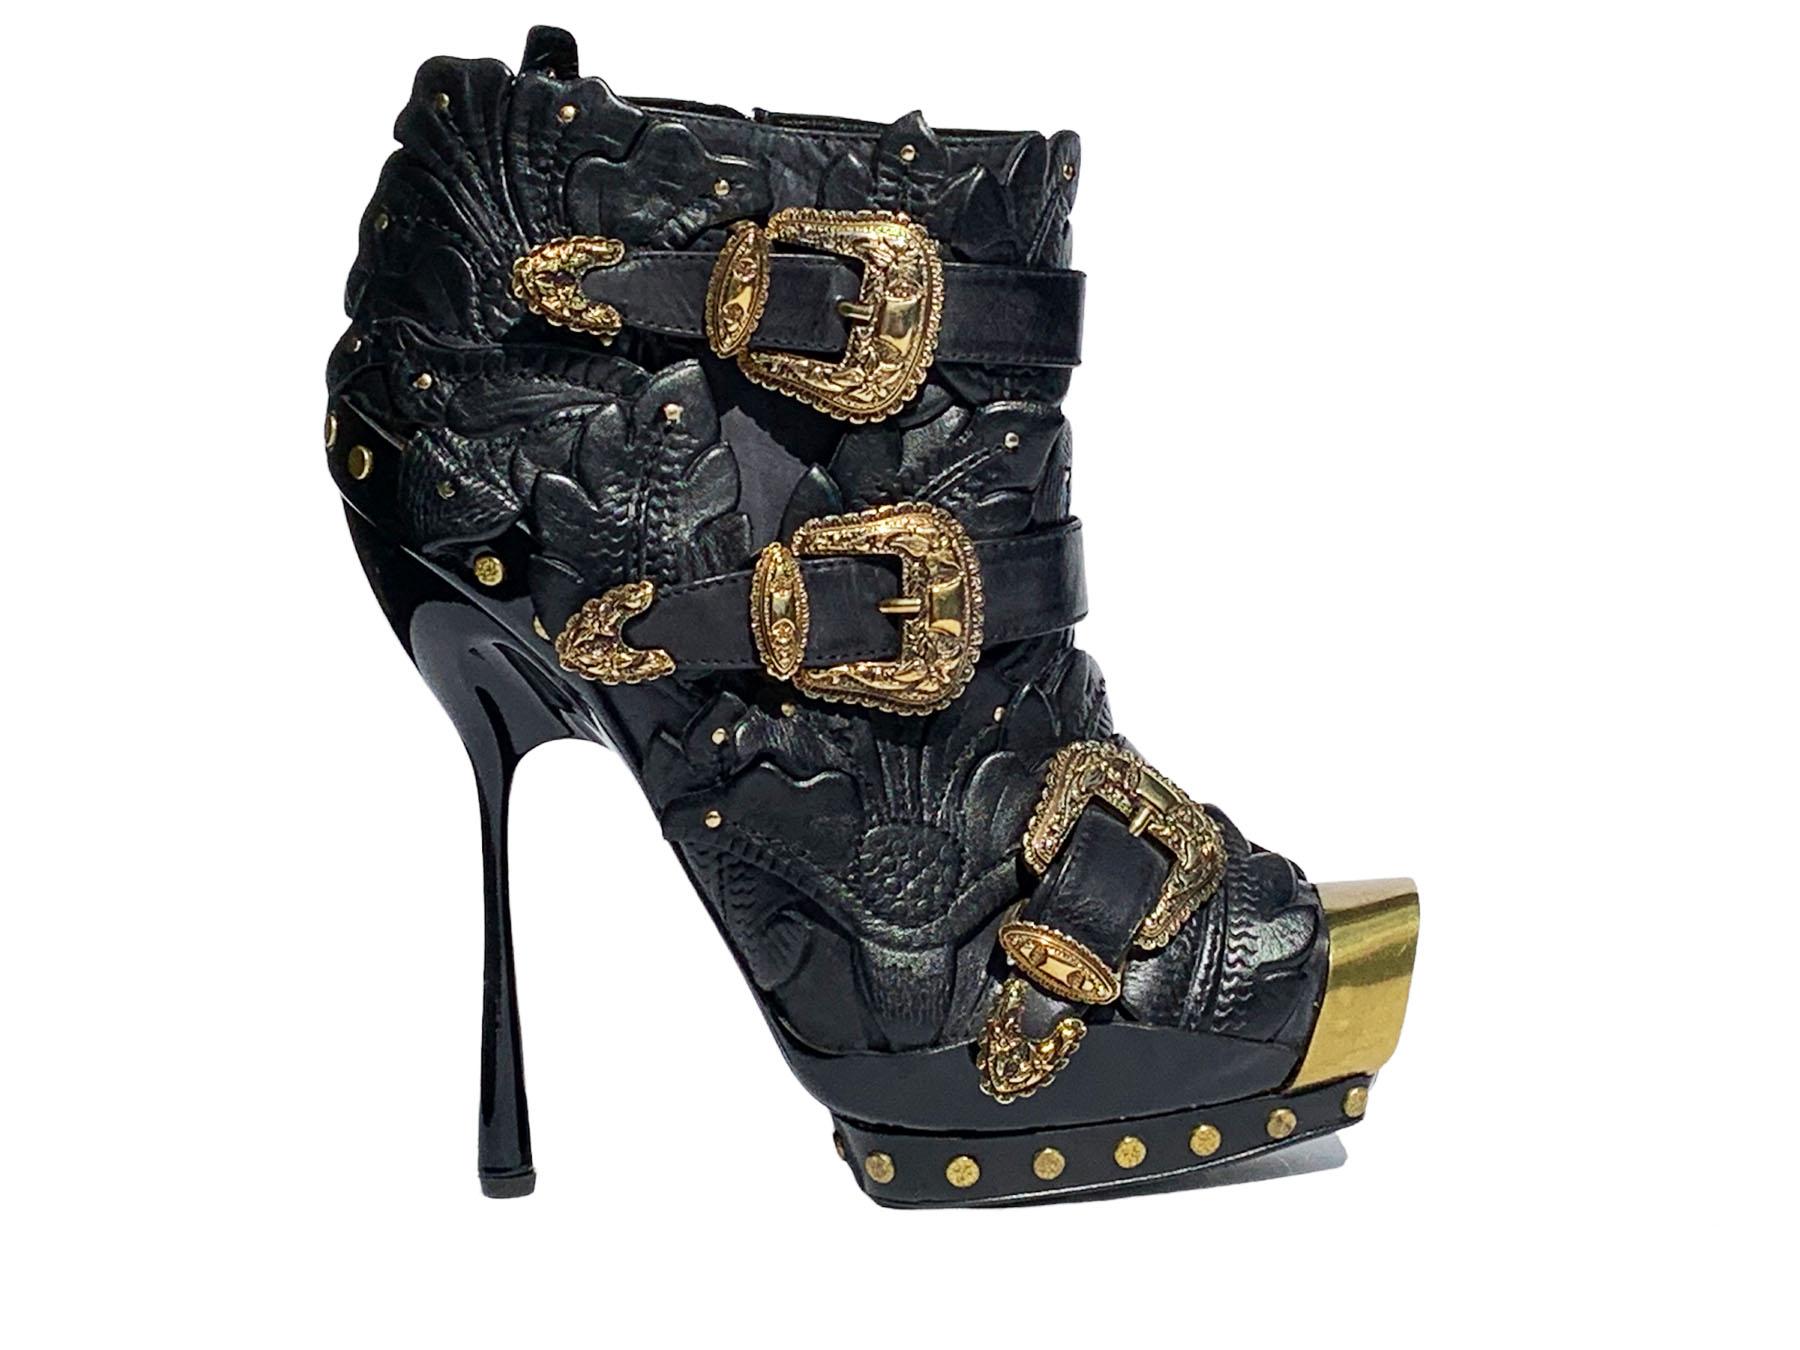 Black New Alexander McQueen S/S 2011 3D Embellished Studded Ankle Boots 39 US 9 For Sale